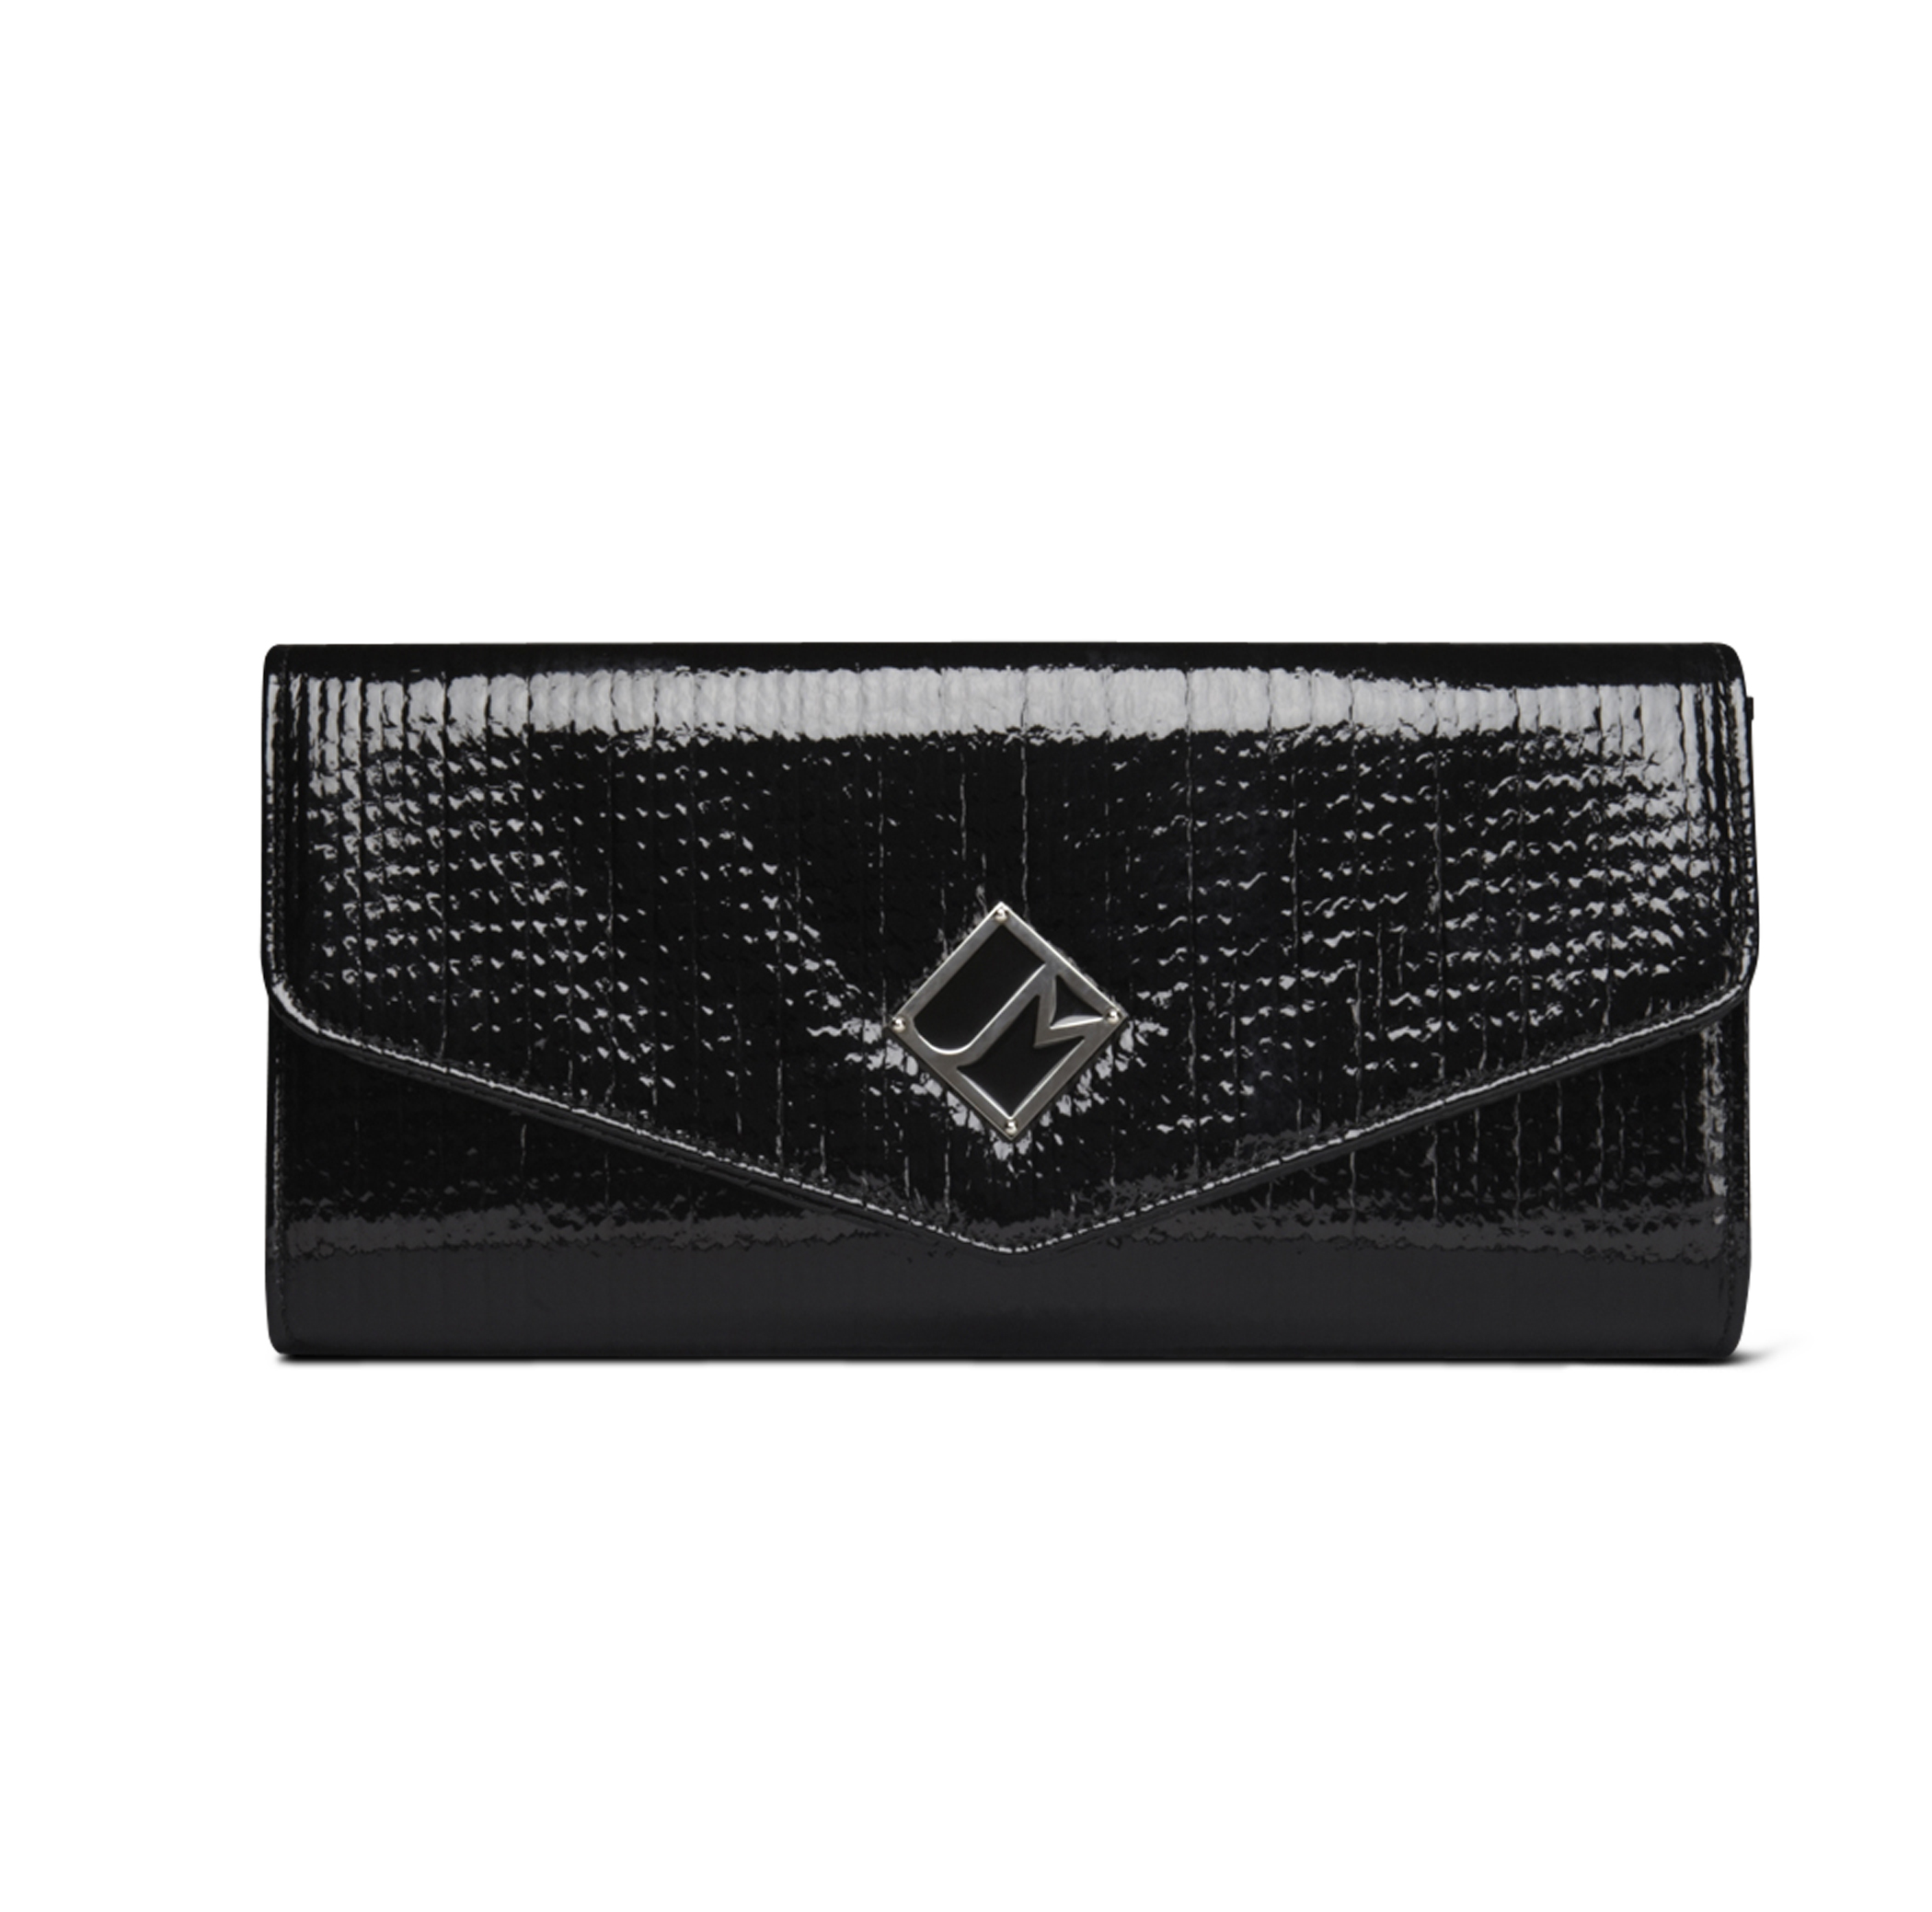 Jill Milan New Canaan Clutch in black textured faux patent